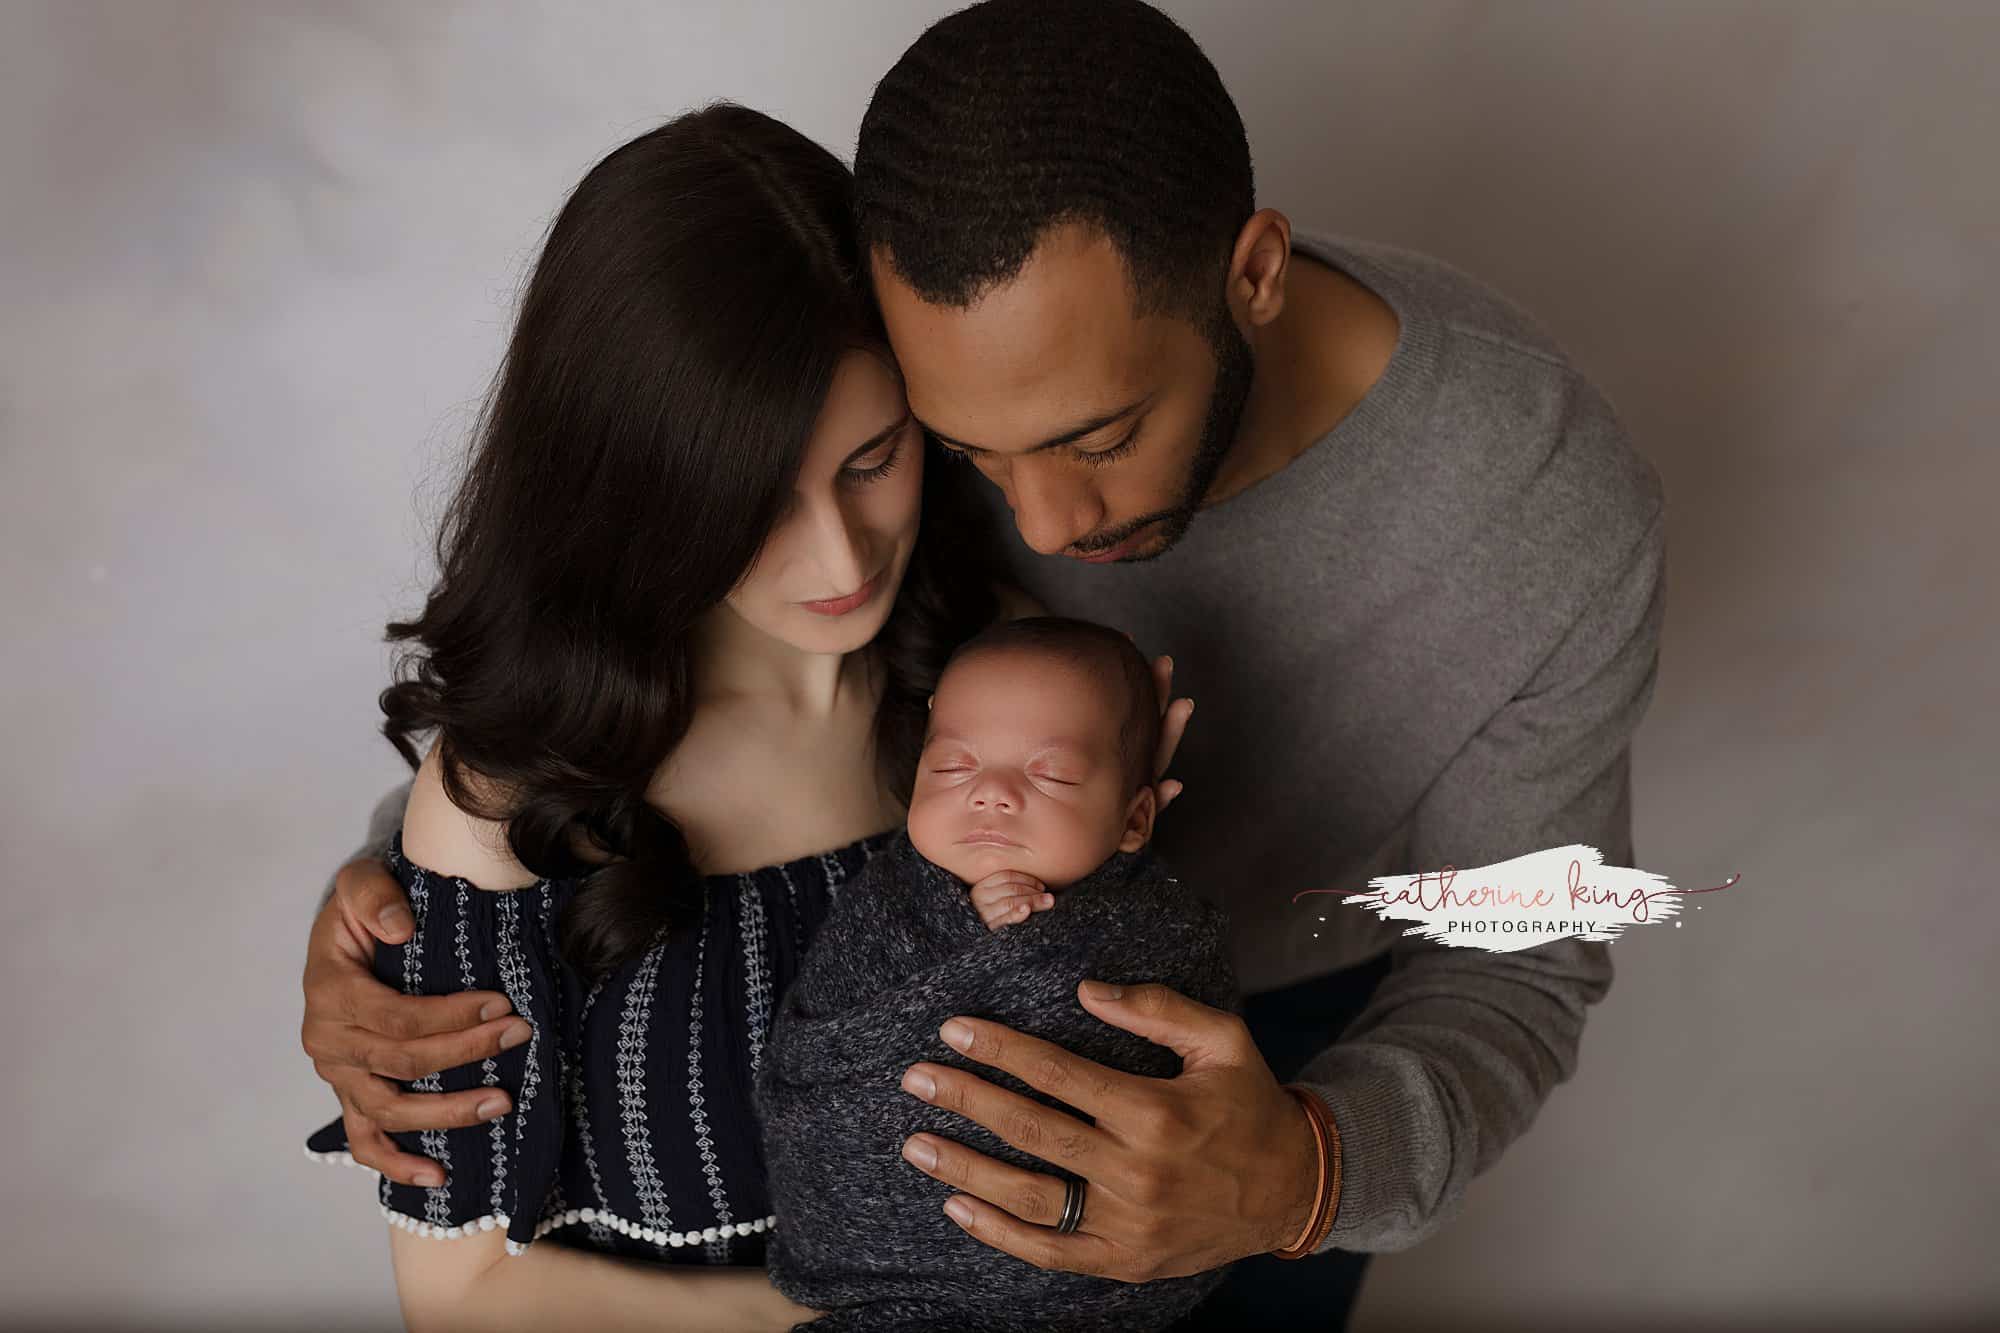 What does All-inclusive newborn photoshoot mean